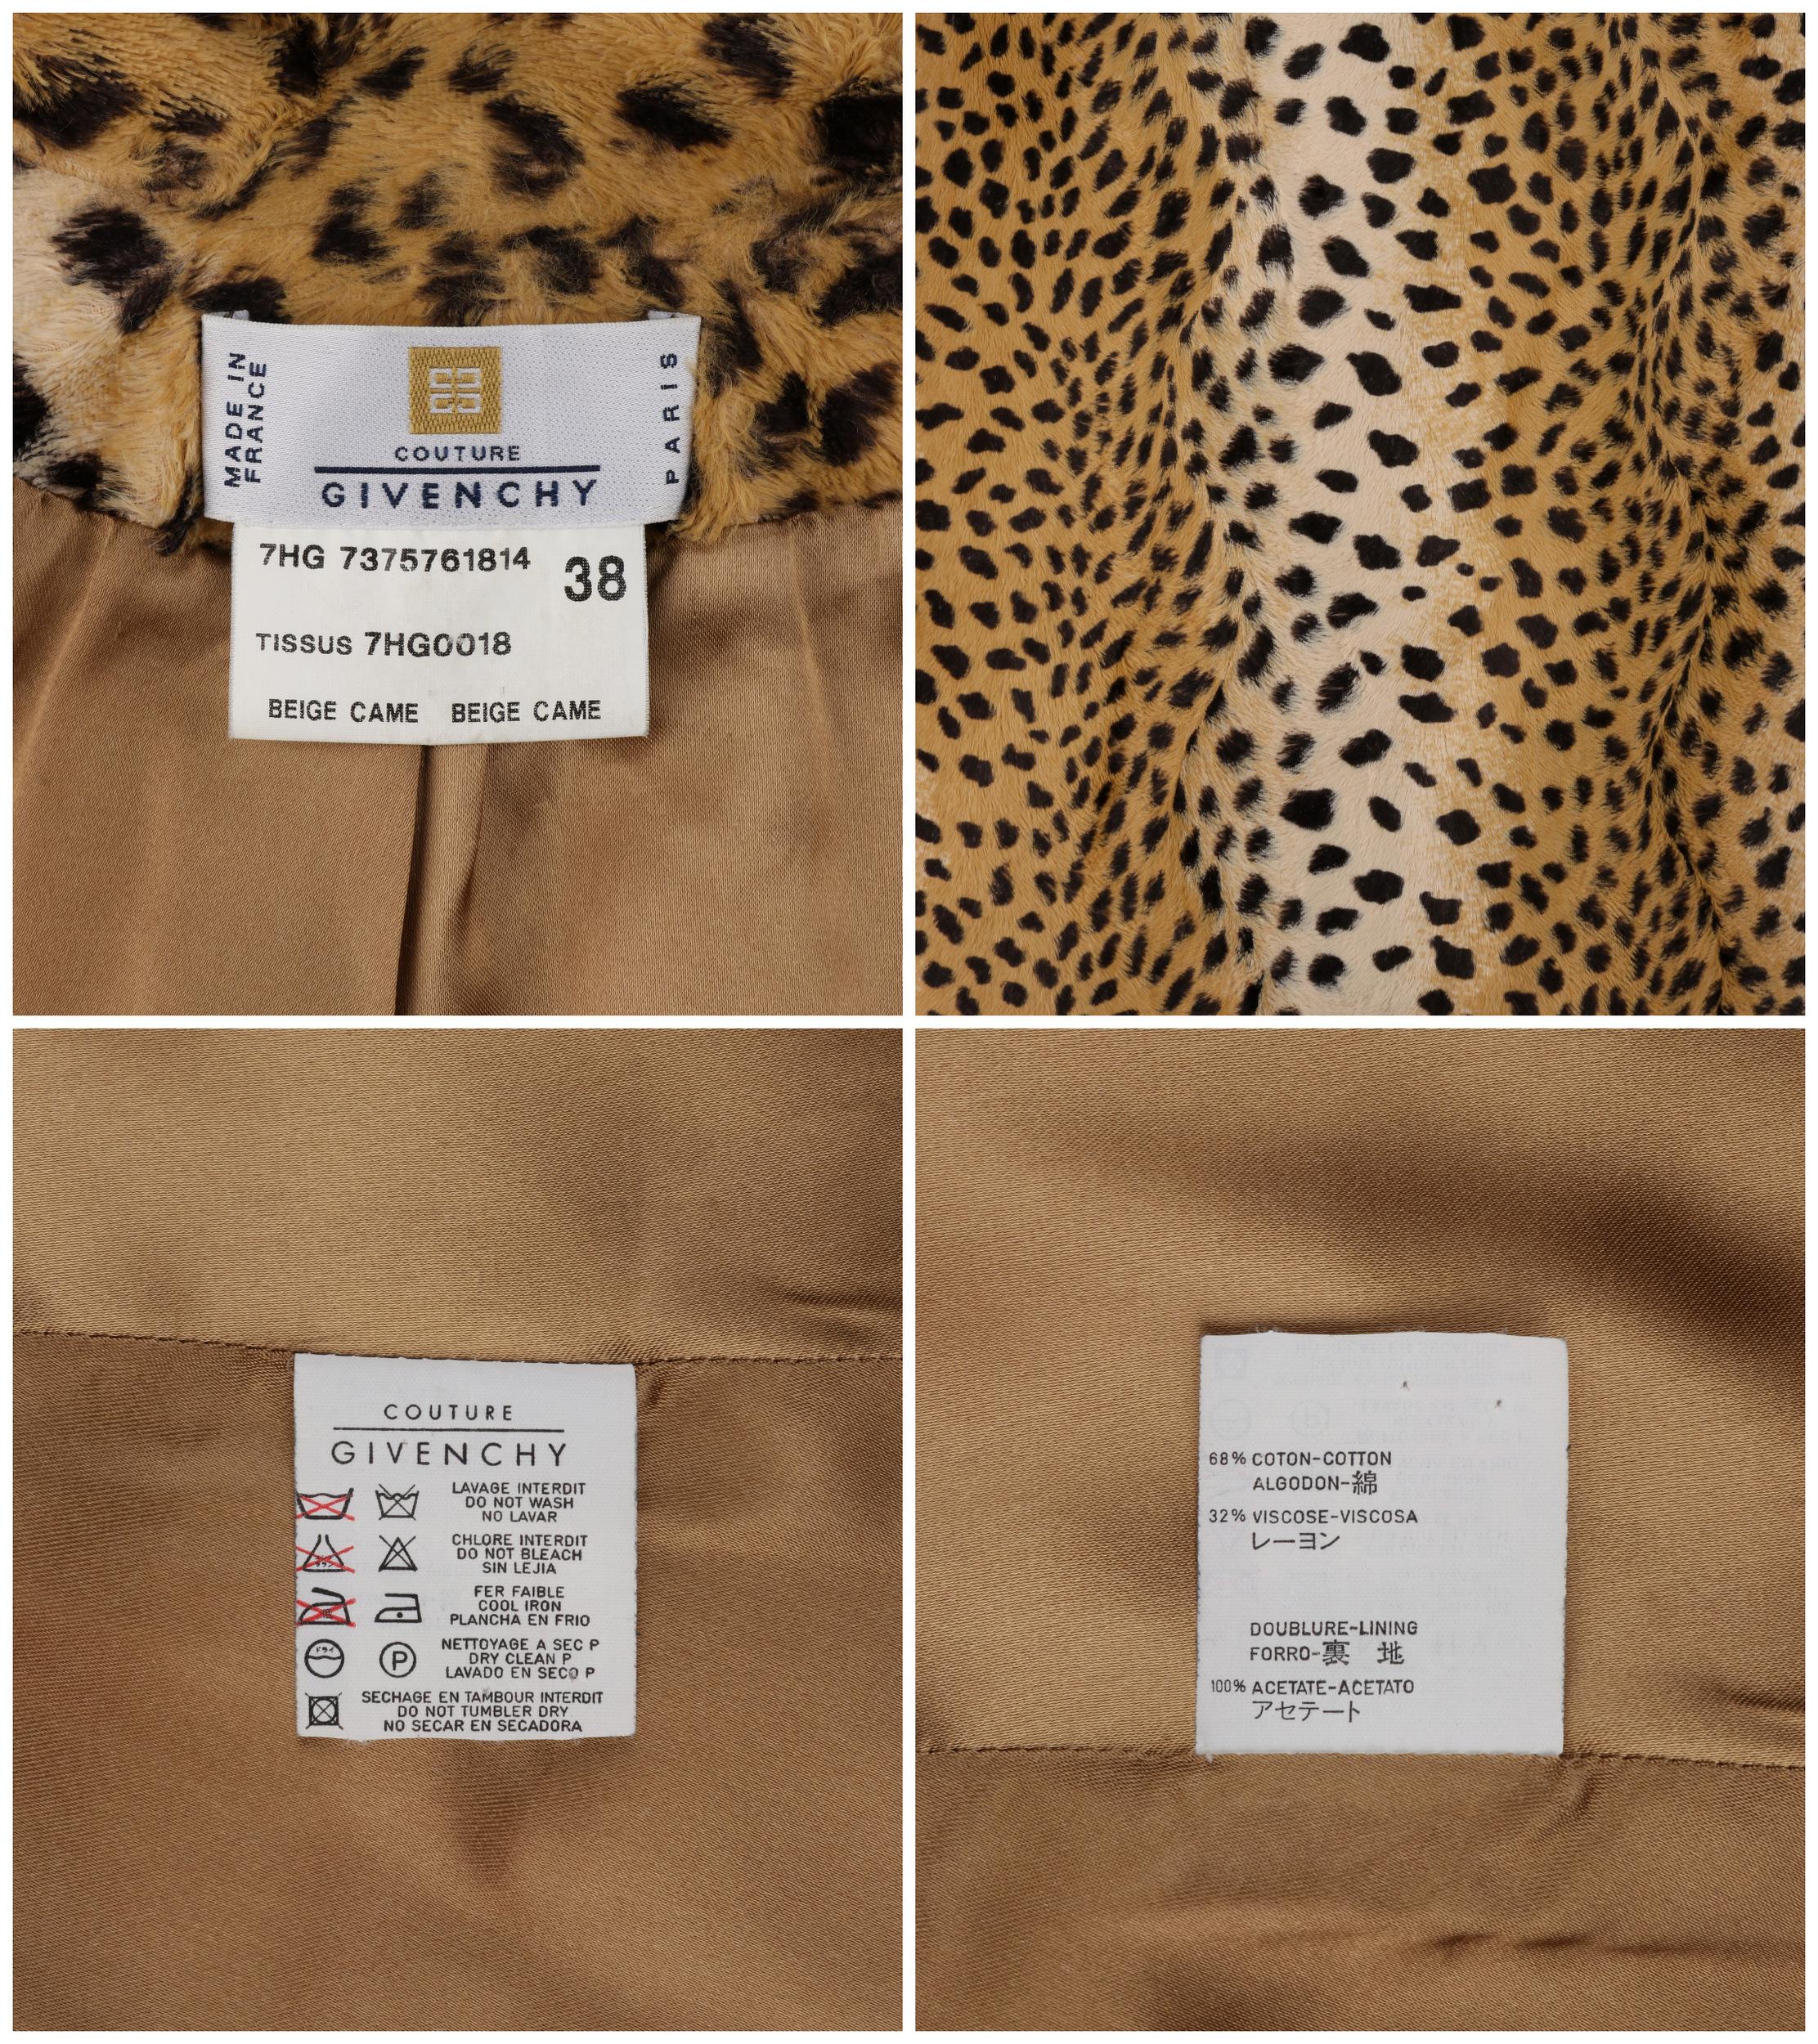 Women's GIVENCHY COUTURE A/W 1997 ALEXANDER McQUEEN Cheetah Print Faux Fur Paneled Coat For Sale